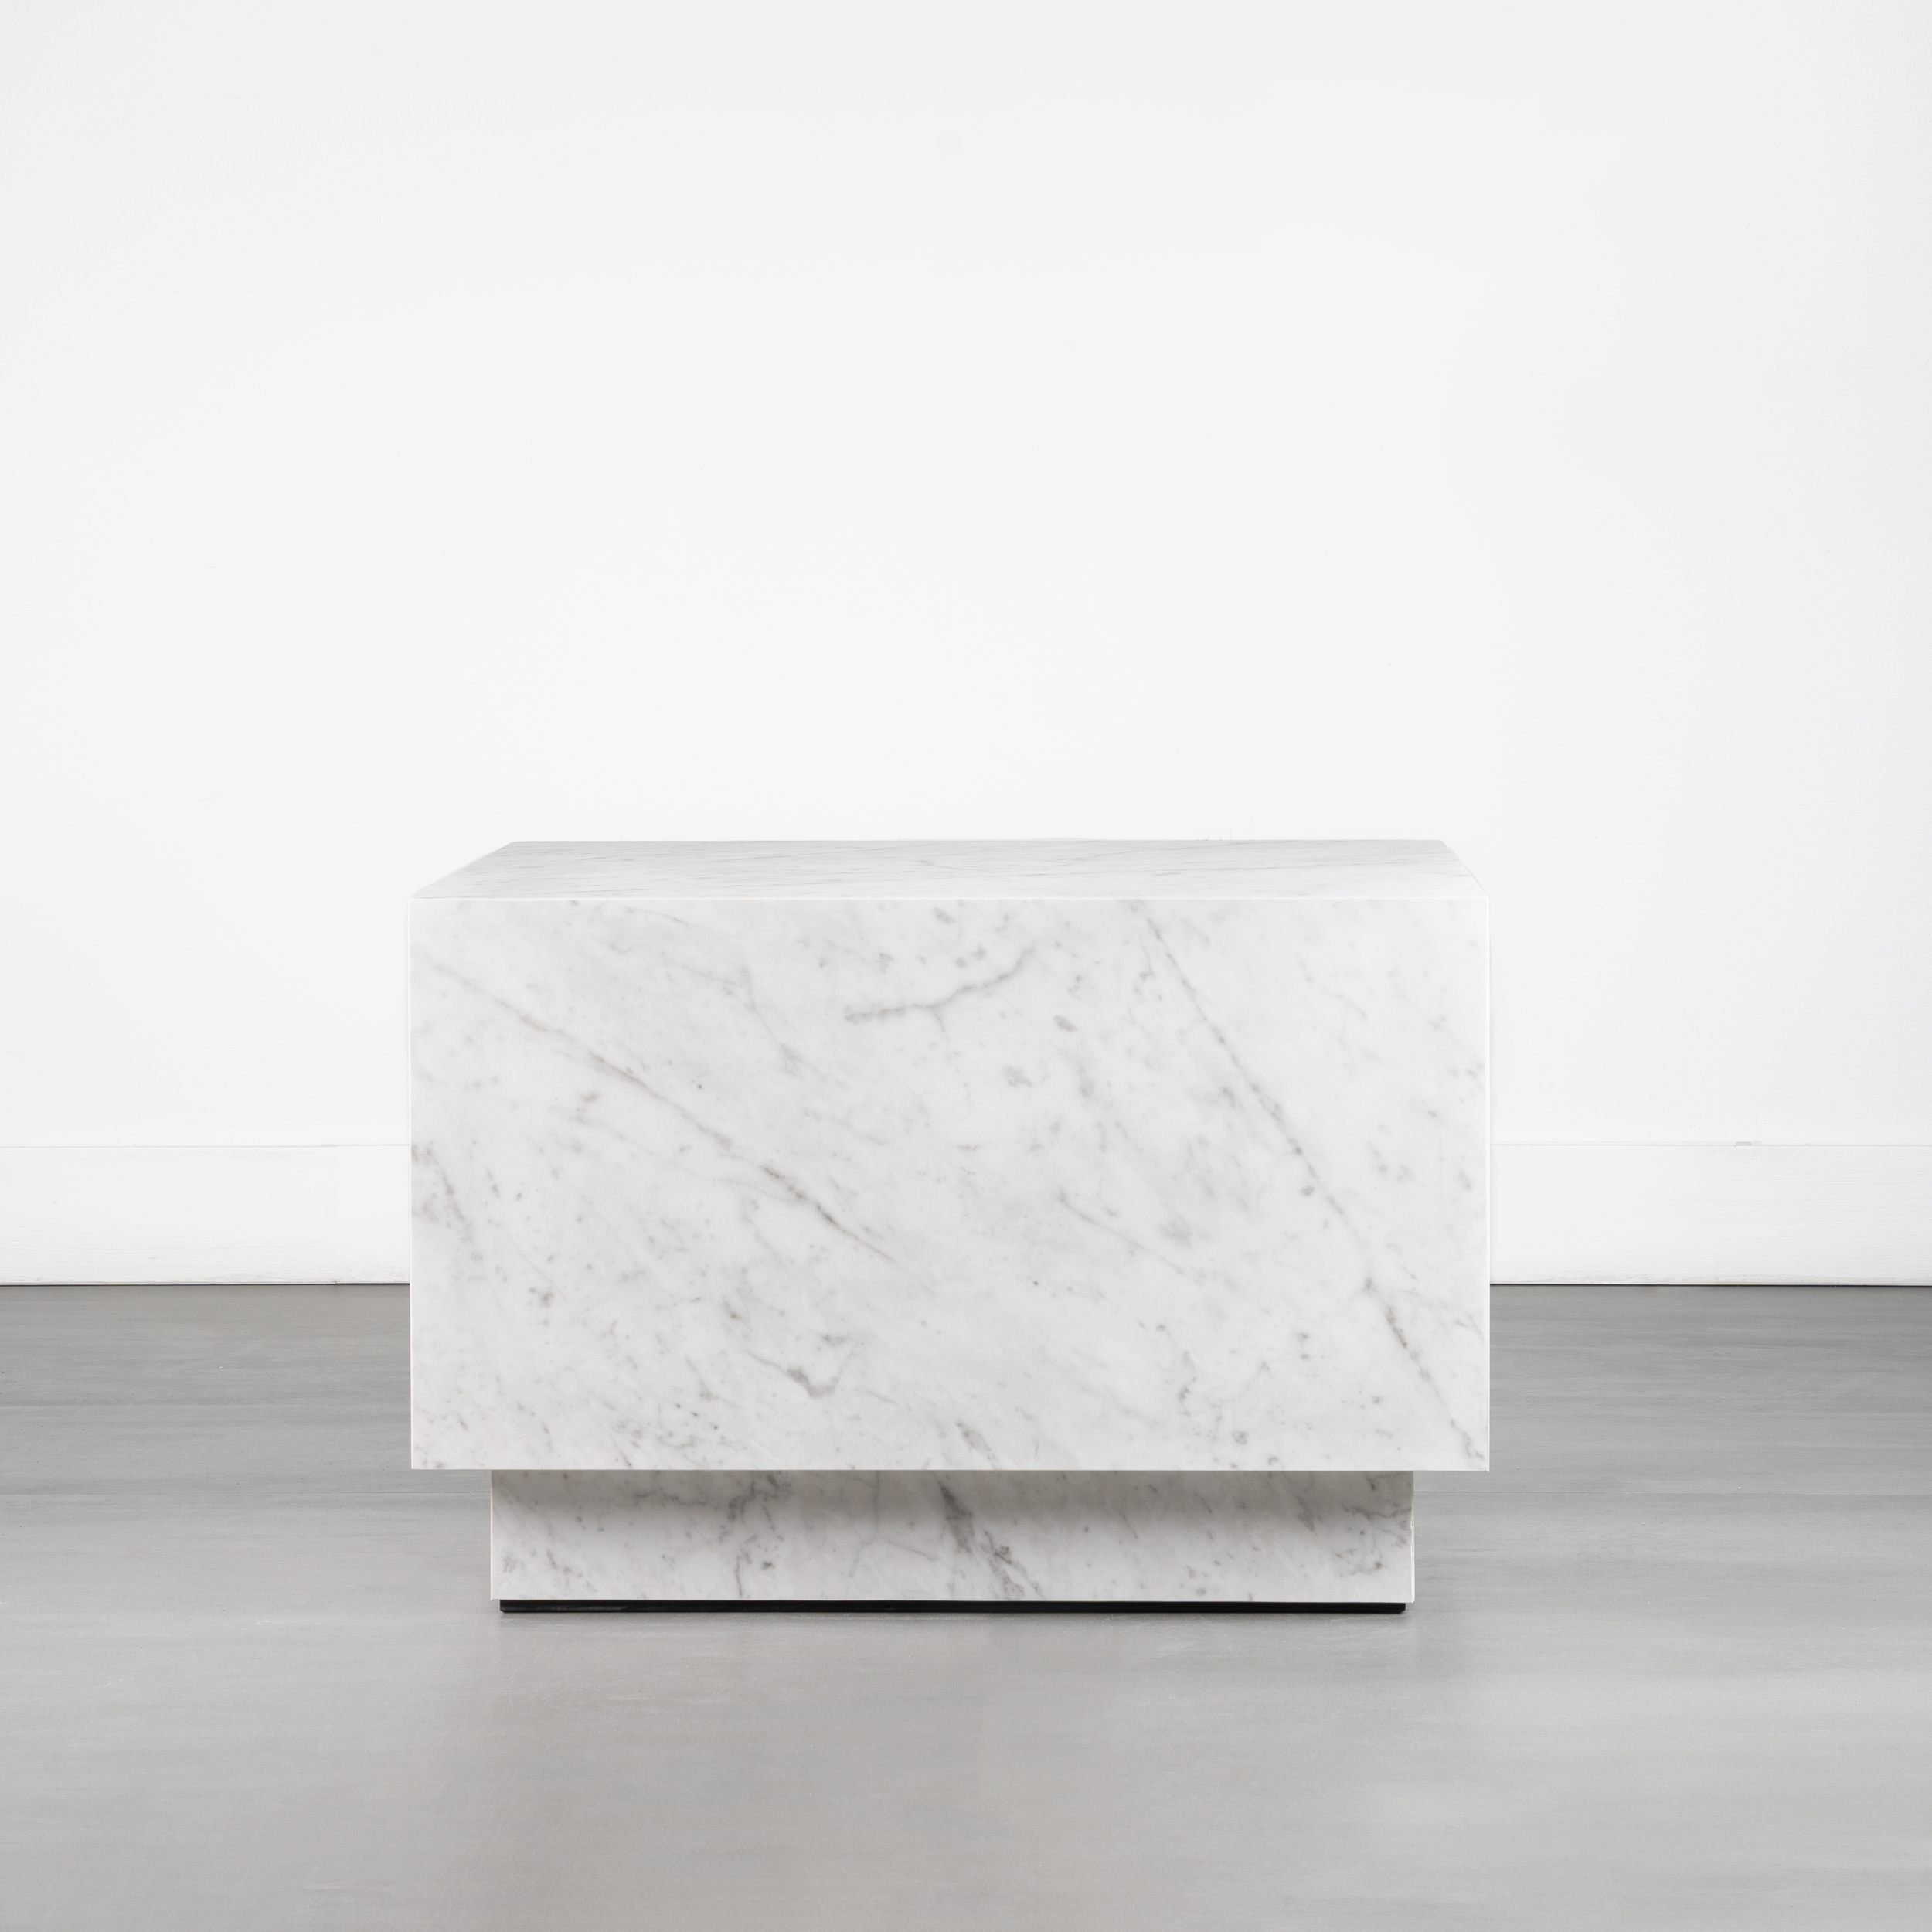 Square Coffee Table in Bianco Carrara Large-format Porcelain